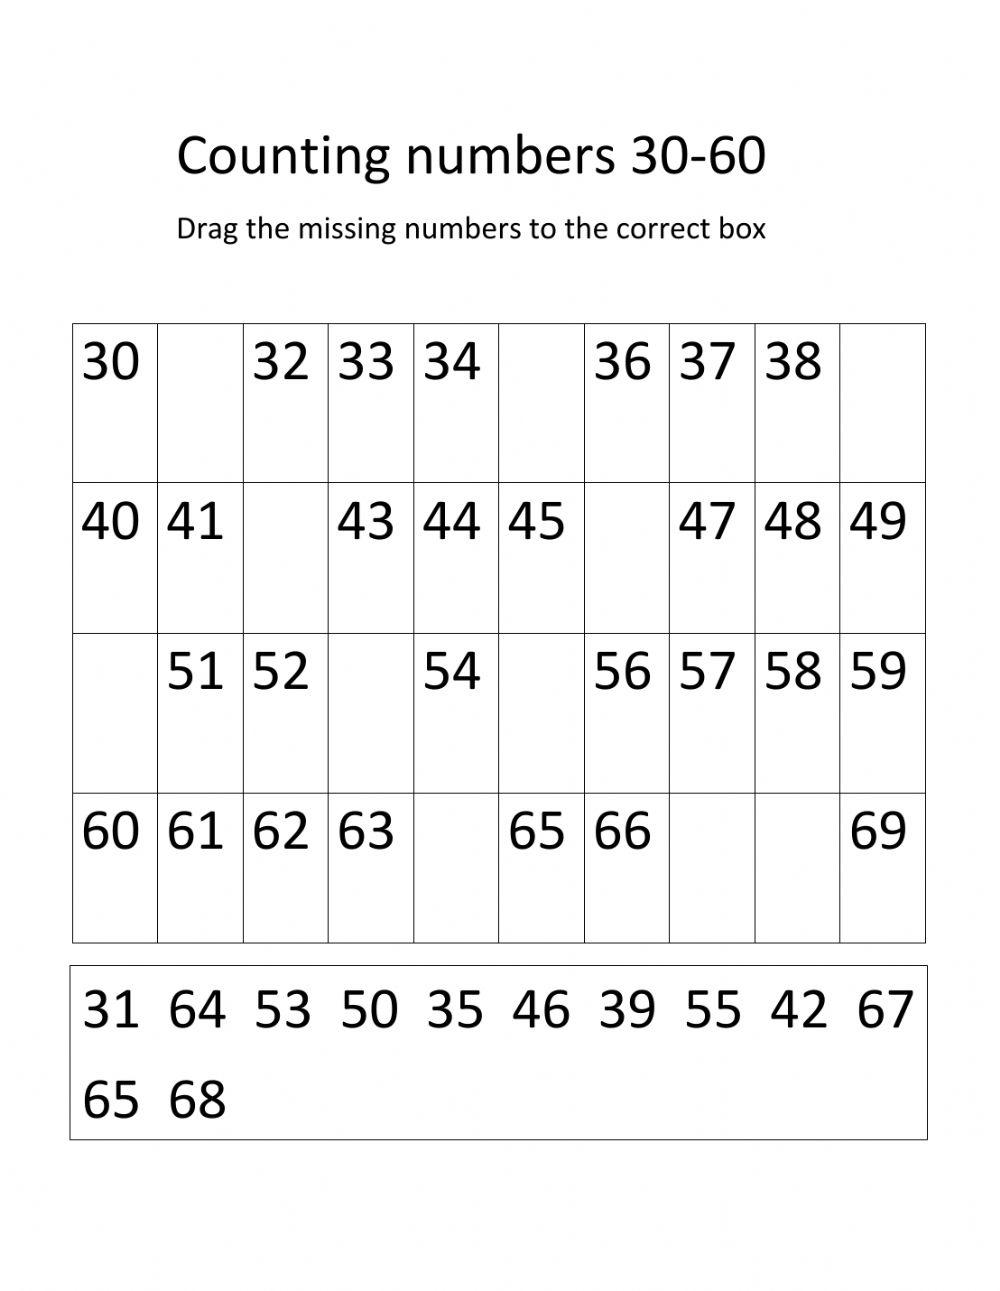 Counting numbers 30-60